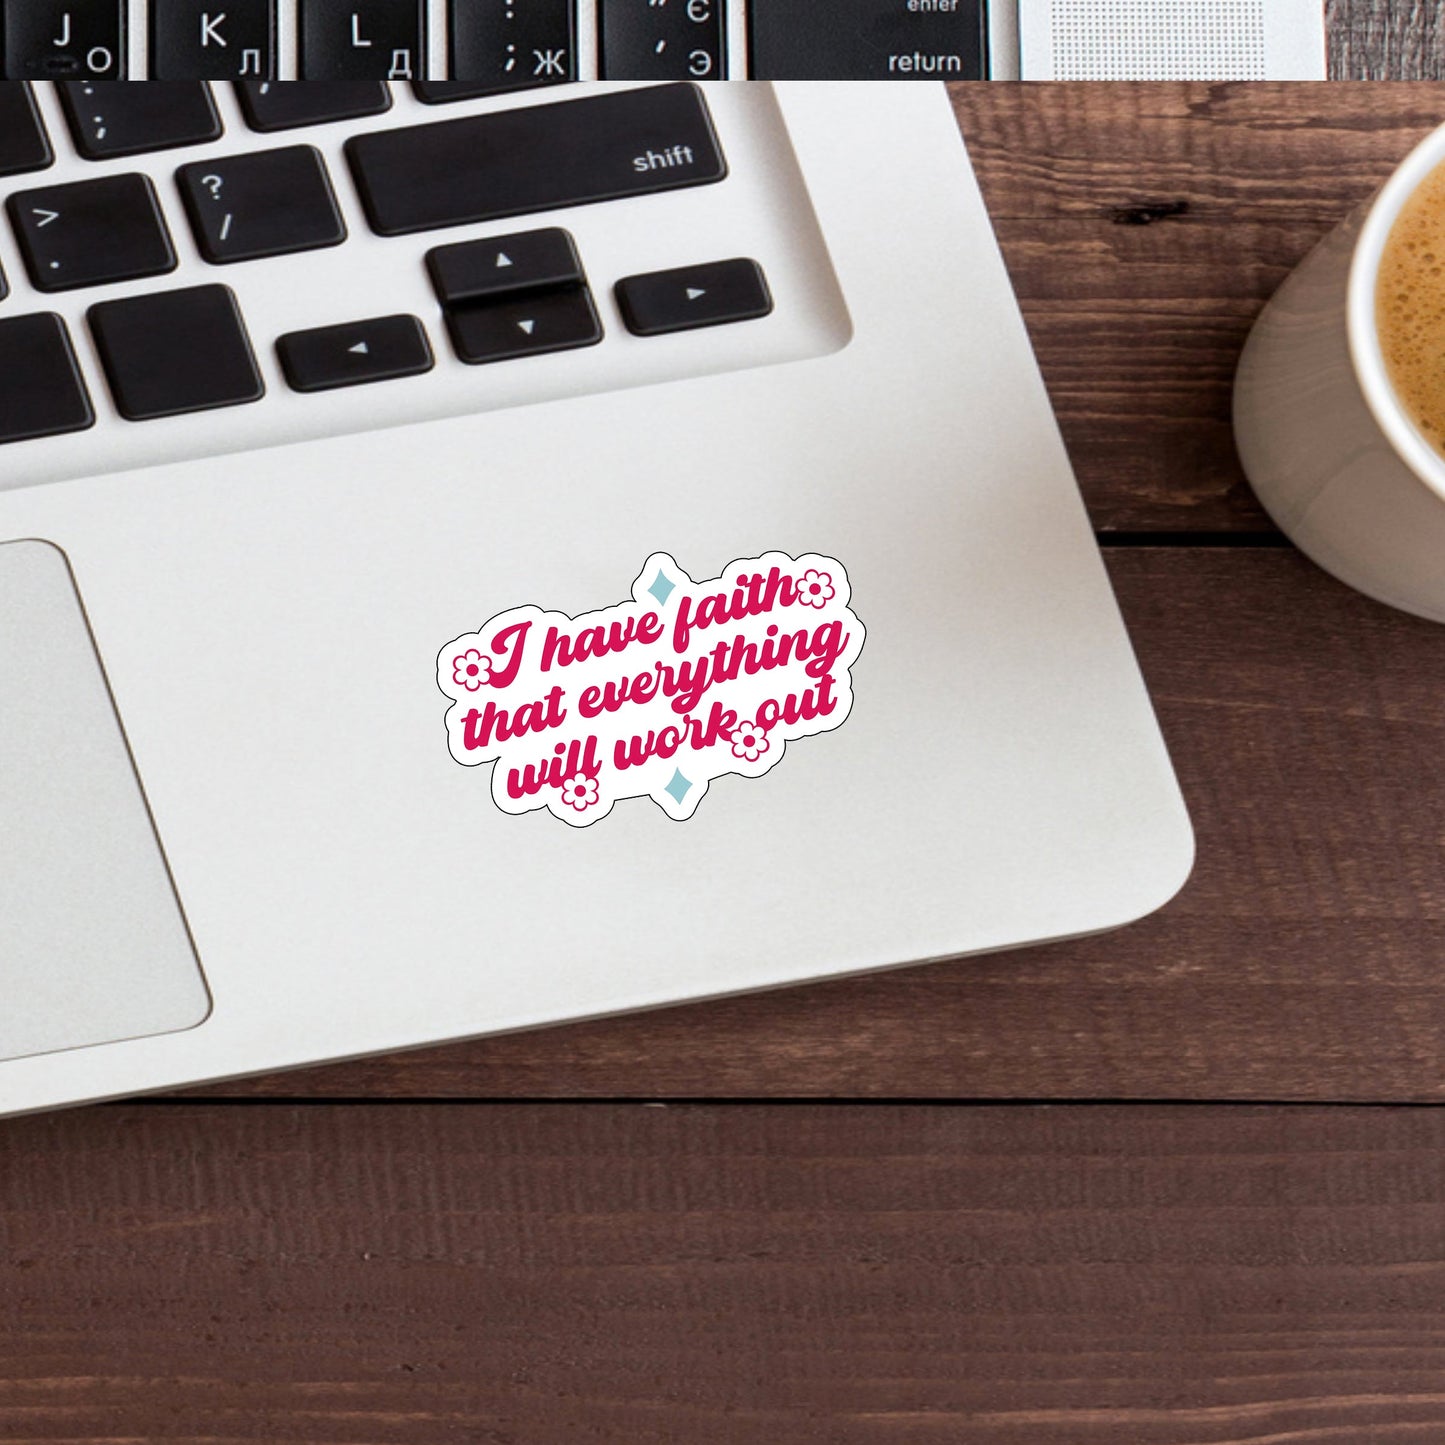 I have faith that everything will workout  Sticker,  Vinyl sticker, laptop sticker, Tablet sticker